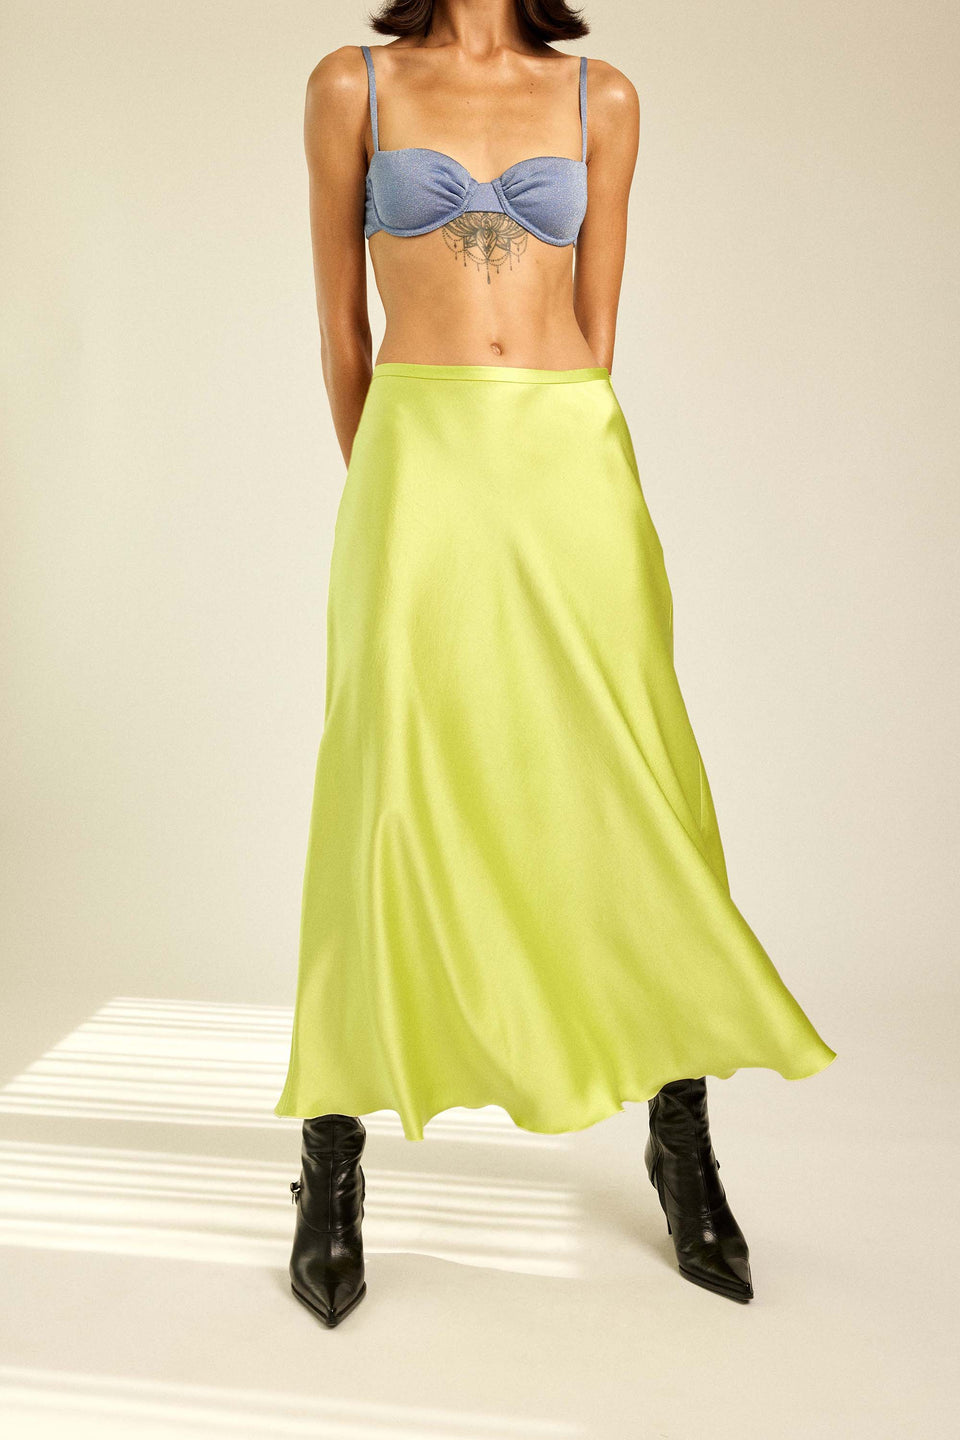 Great flattering fit Colorful Satin Skirt for all sizes.